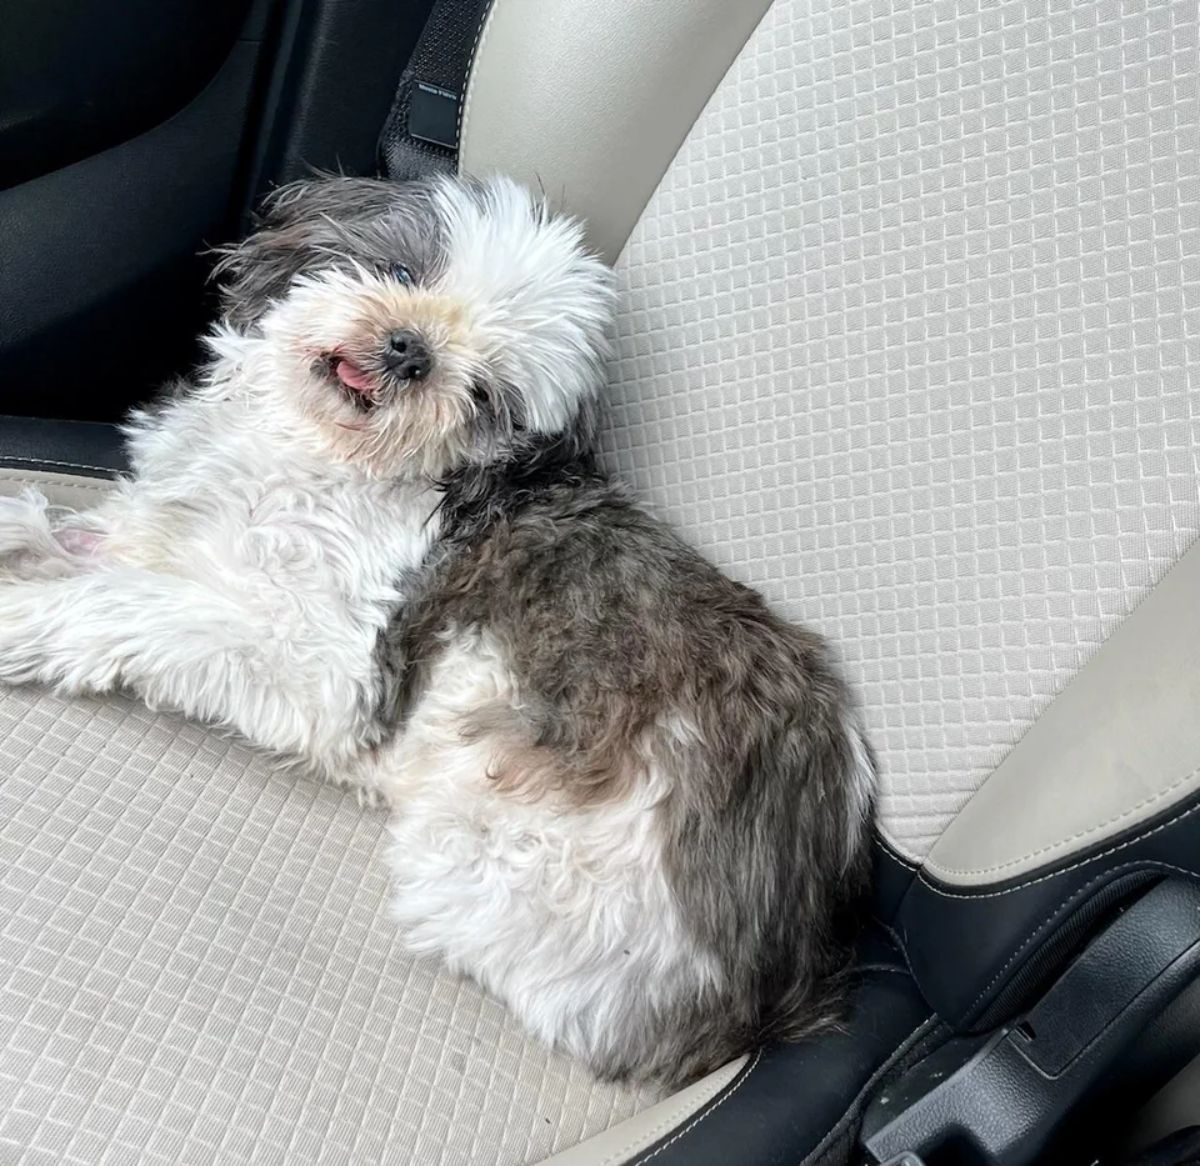 fluffy grey and white dog laying on a car seat with the tongue sticking out slightly